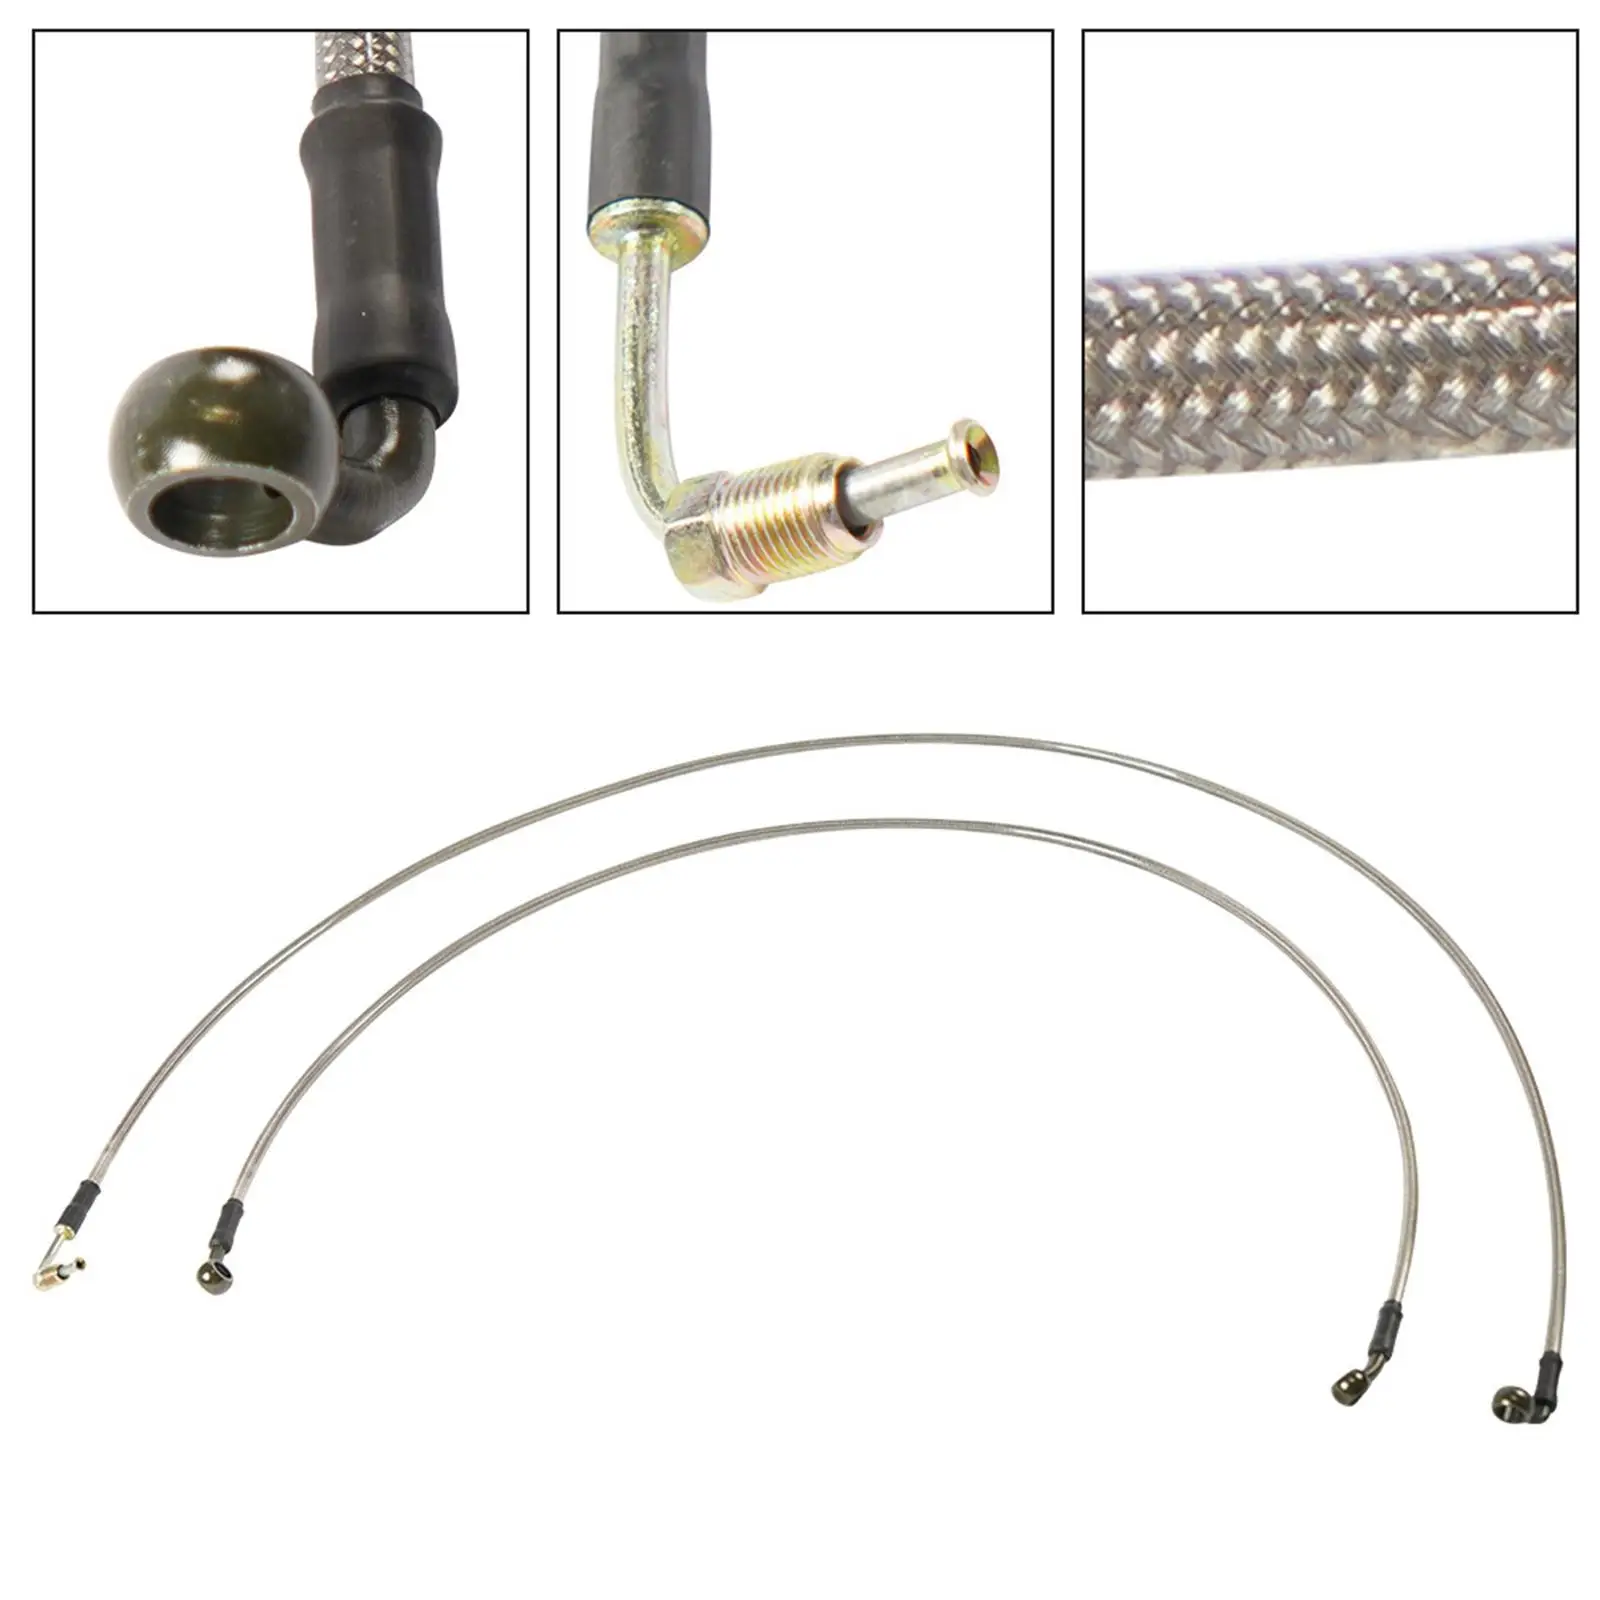 1Pair Brake Lines Replace Extended Front & Rear Brake Lines Fit for Polaris RZR 800 4 800 XP 900